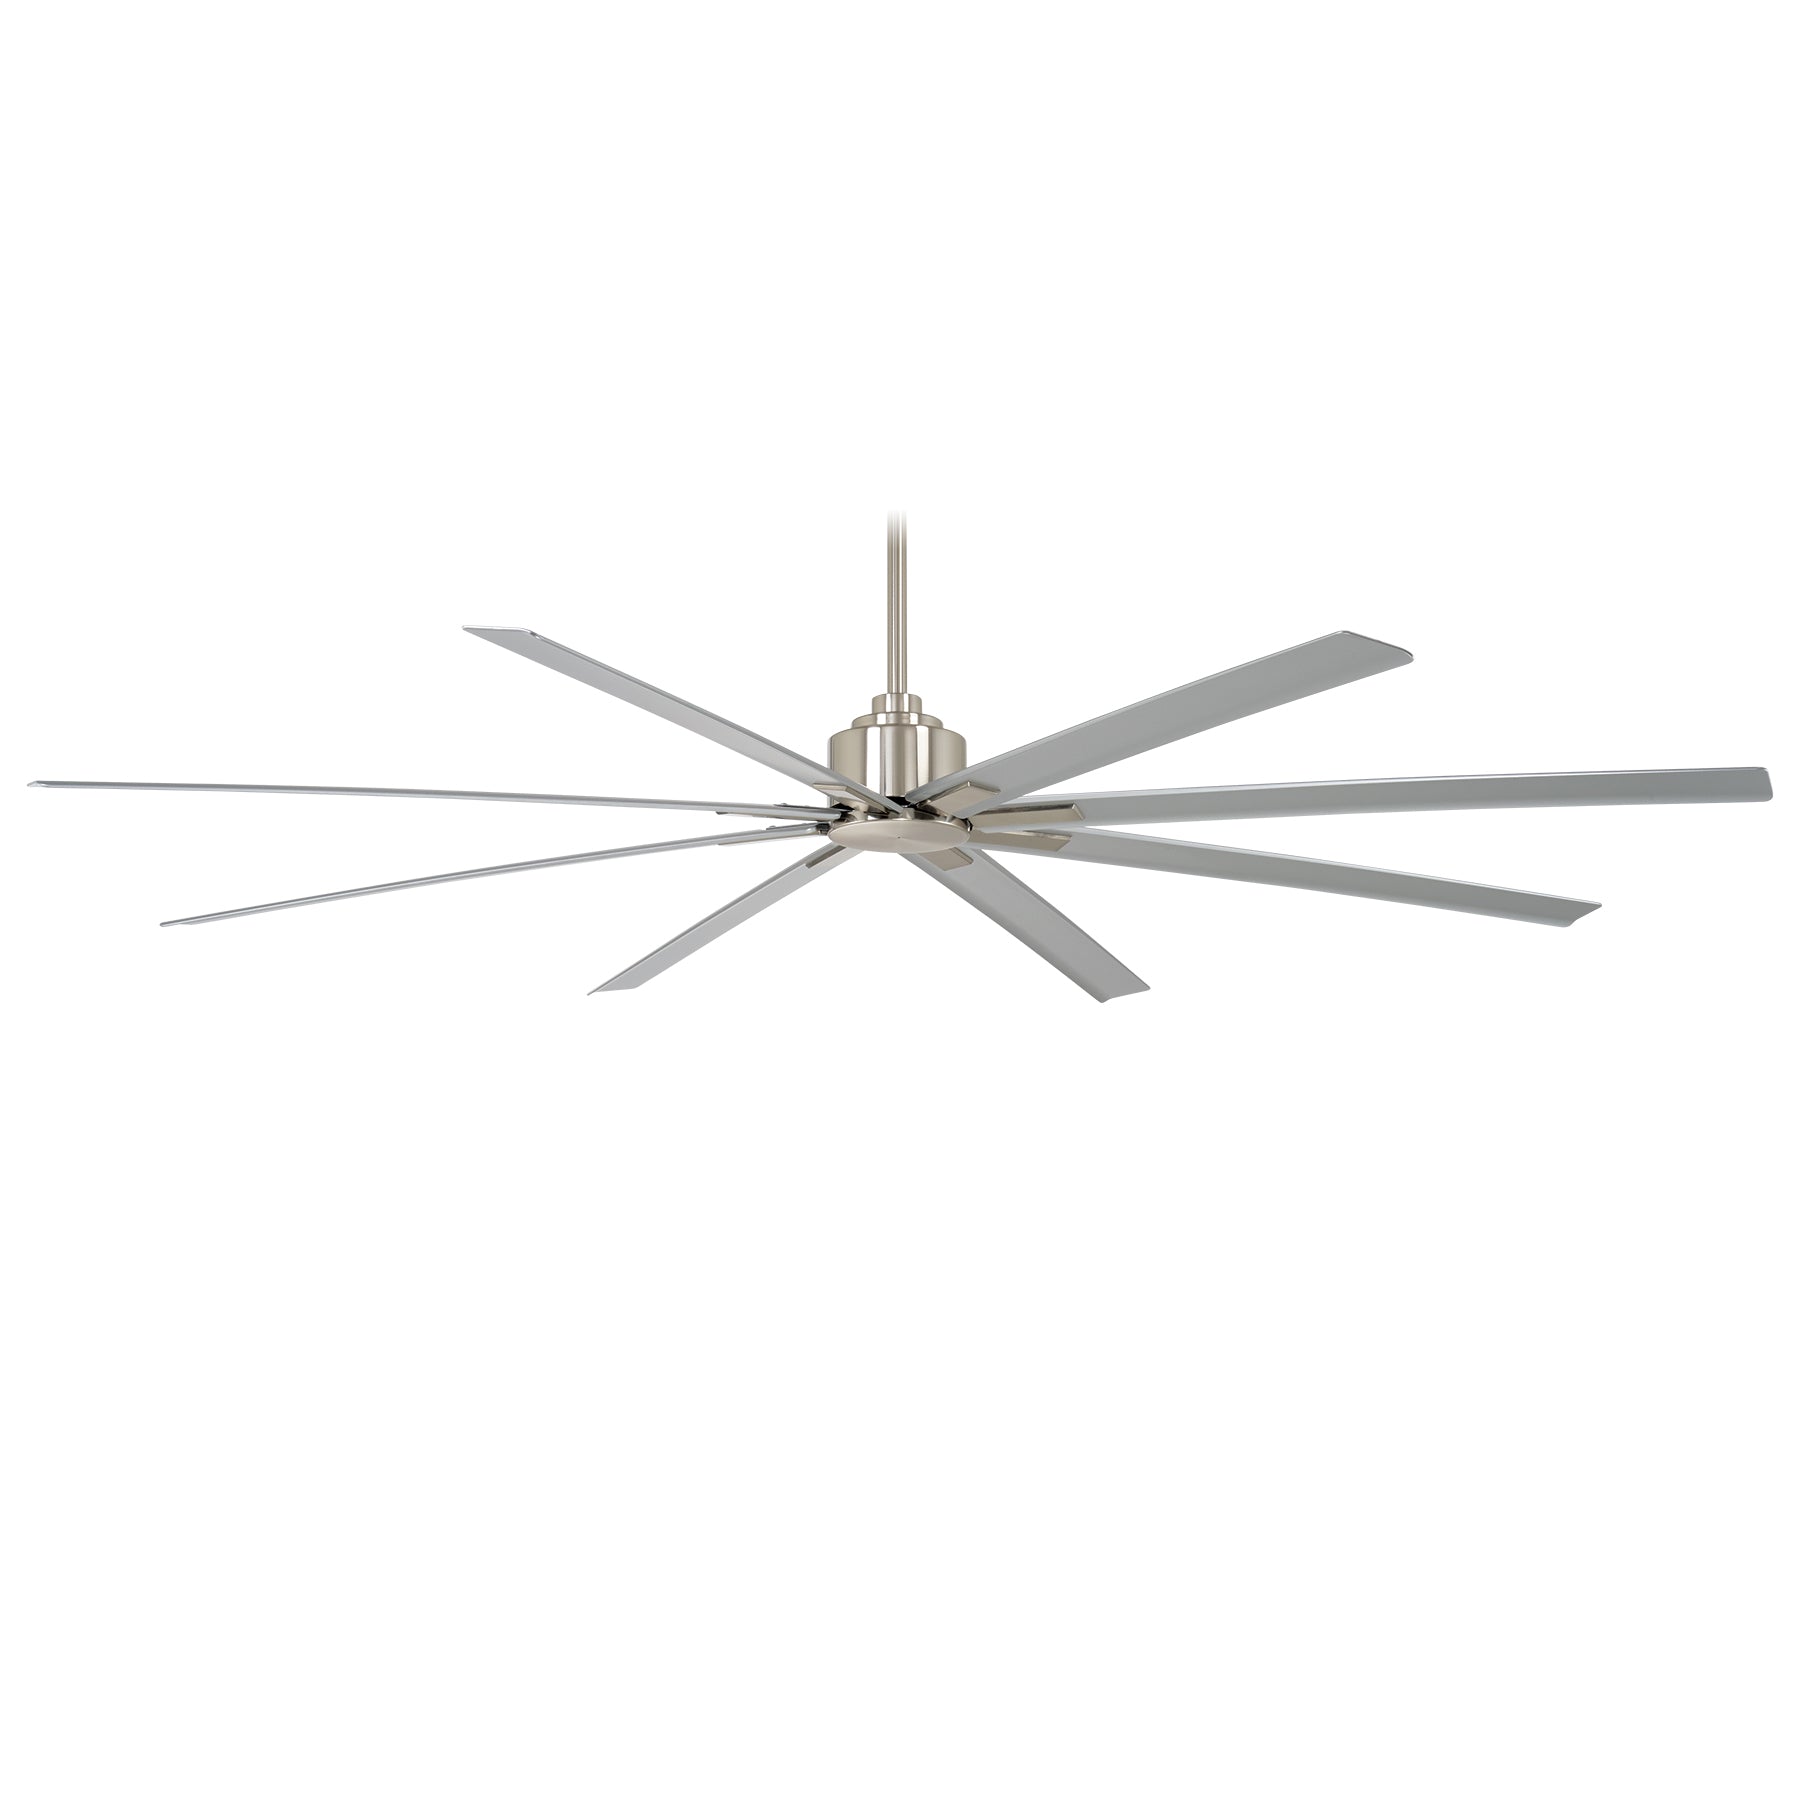 Minka Aire Xtreme H2O 84" F896-84 Ceiling Fan Minka-Aire BRUSHED NICKEL WET / SILVER  